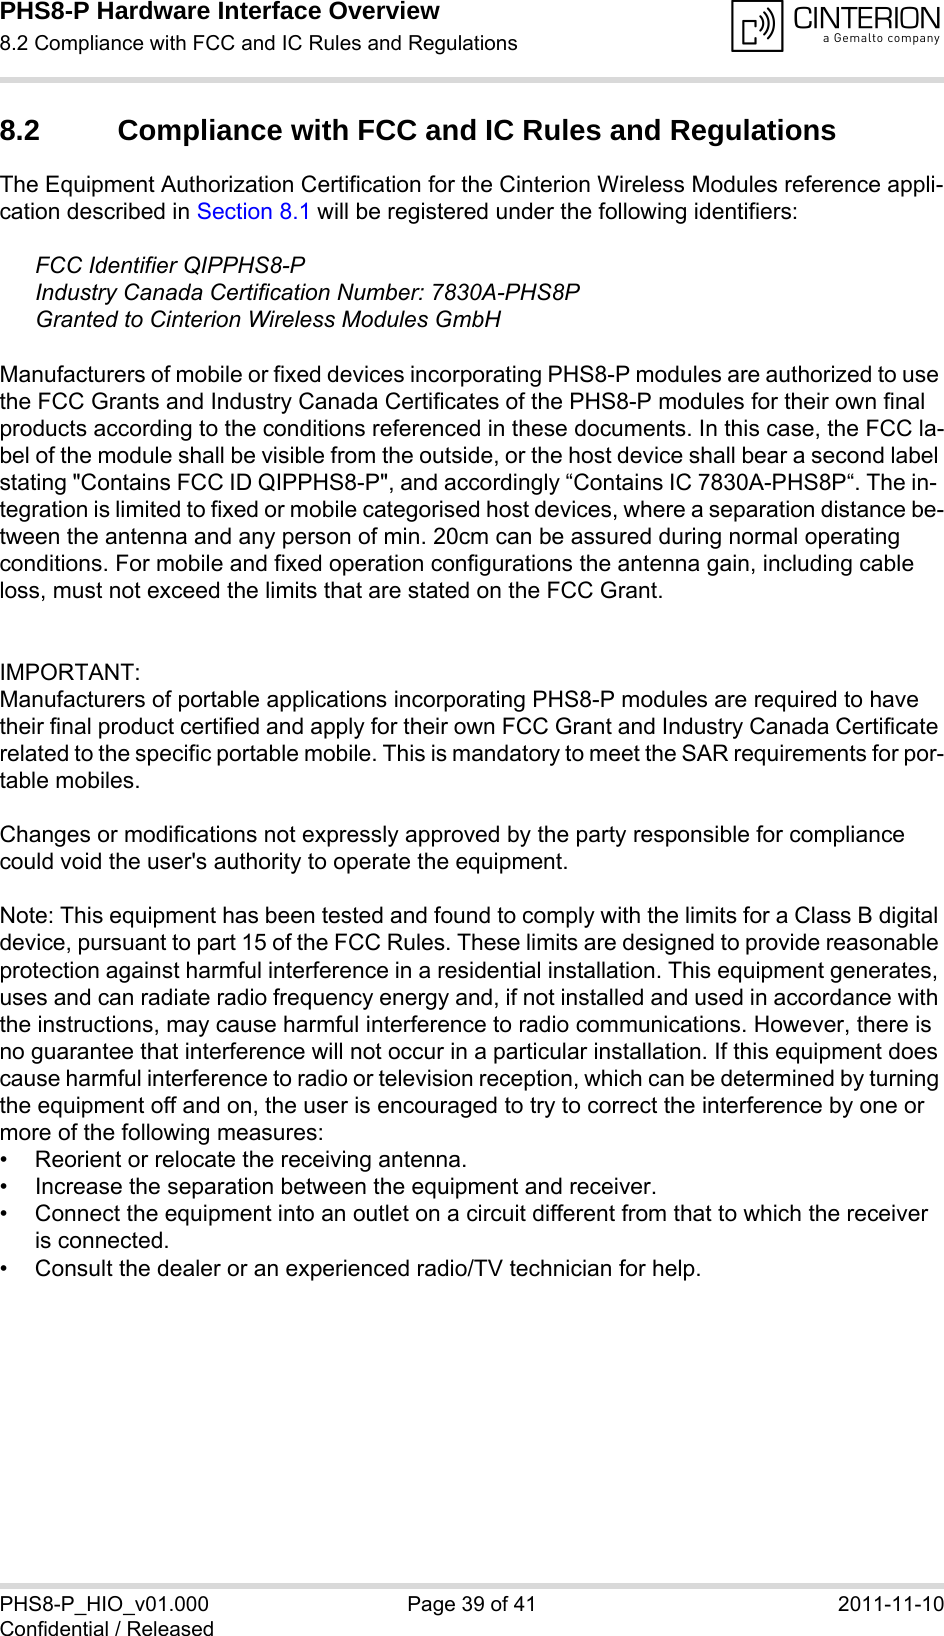 PHS8-P Hardware Interface Overview8.2 Compliance with FCC and IC Rules and Regulations39PHS8-P_HIO_v01.000 Page 39 of 41 2011-11-10Confidential / Released8.2 Compliance with FCC and IC Rules and Regulations The Equipment Authorization Certification for the Cinterion Wireless Modules reference appli-cation described in Section 8.1 will be registered under the following identifiers:FCC Identifier QIPPHS8-PIndustry Canada Certification Number: 7830A-PHS8PGranted to Cinterion Wireless Modules GmbH Manufacturers of mobile or fixed devices incorporating PHS8-P modules are authorized to use the FCC Grants and Industry Canada Certificates of the PHS8-P modules for their own final products according to the conditions referenced in these documents. In this case, the FCC la-bel of the module shall be visible from the outside, or the host device shall bear a second label stating &quot;Contains FCC ID QIPPHS8-P&quot;, and accordingly “Contains IC 7830A-PHS8P“. The in-tegration is limited to fixed or mobile categorised host devices, where a separation distance be-tween the antenna and any person of min. 20cm can be assured during normal operating conditions. For mobile and fixed operation configurations the antenna gain, including cable loss, must not exceed the limits that are stated on the FCC Grant.IMPORTANT:Manufacturers of portable applications incorporating PHS8-P modules are required to have their final product certified and apply for their own FCC Grant and Industry Canada Certificate related to the specific portable mobile. This is mandatory to meet the SAR requirements for por-table mobiles.Changes or modifications not expressly approved by the party responsible for compliance could void the user&apos;s authority to operate the equipment.Note: This equipment has been tested and found to comply with the limits for a Class B digital device, pursuant to part 15 of the FCC Rules. These limits are designed to provide reasonable protection against harmful interference in a residential installation. This equipment generates, uses and can radiate radio frequency energy and, if not installed and used in accordance with the instructions, may cause harmful interference to radio communications. However, there is no guarantee that interference will not occur in a particular installation. If this equipment does cause harmful interference to radio or television reception, which can be determined by turning the equipment off and on, the user is encouraged to try to correct the interference by one or more of the following measures: • Reorient or relocate the receiving antenna. • Increase the separation between the equipment and receiver. • Connect the equipment into an outlet on a circuit different from that to which the receiver is connected. • Consult the dealer or an experienced radio/TV technician for help.